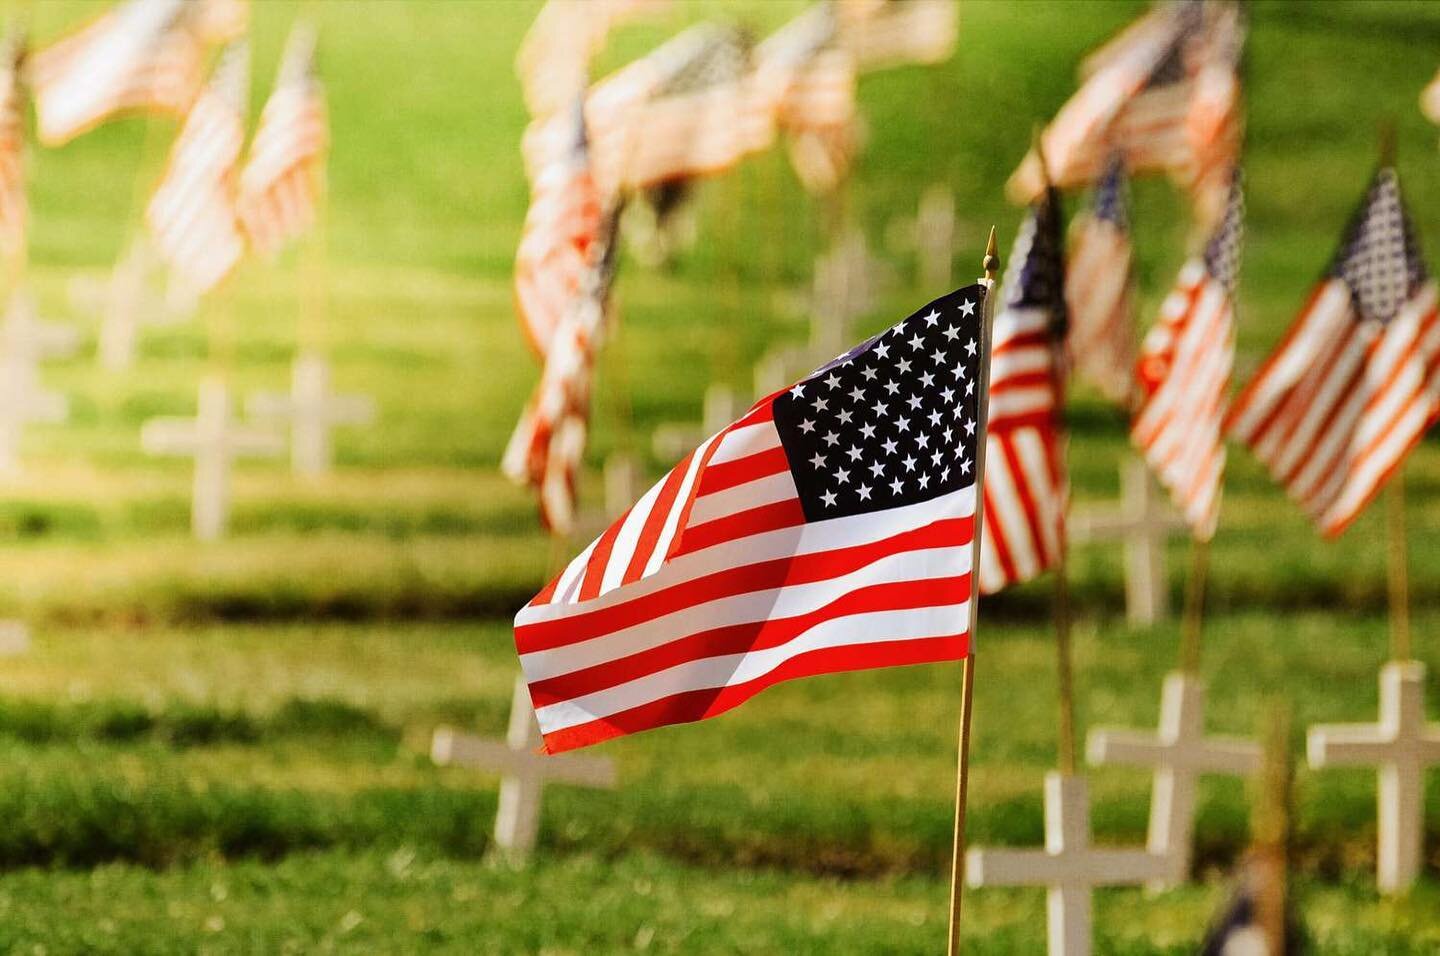 &quot;Our flag does not fly because the wind moves it. It flies with the last breath of each soldier who died protecting it.&quot; 

Sending lots of love out to those who have had a loved one pay the ultimate sacrifice in honor of our country. We rem